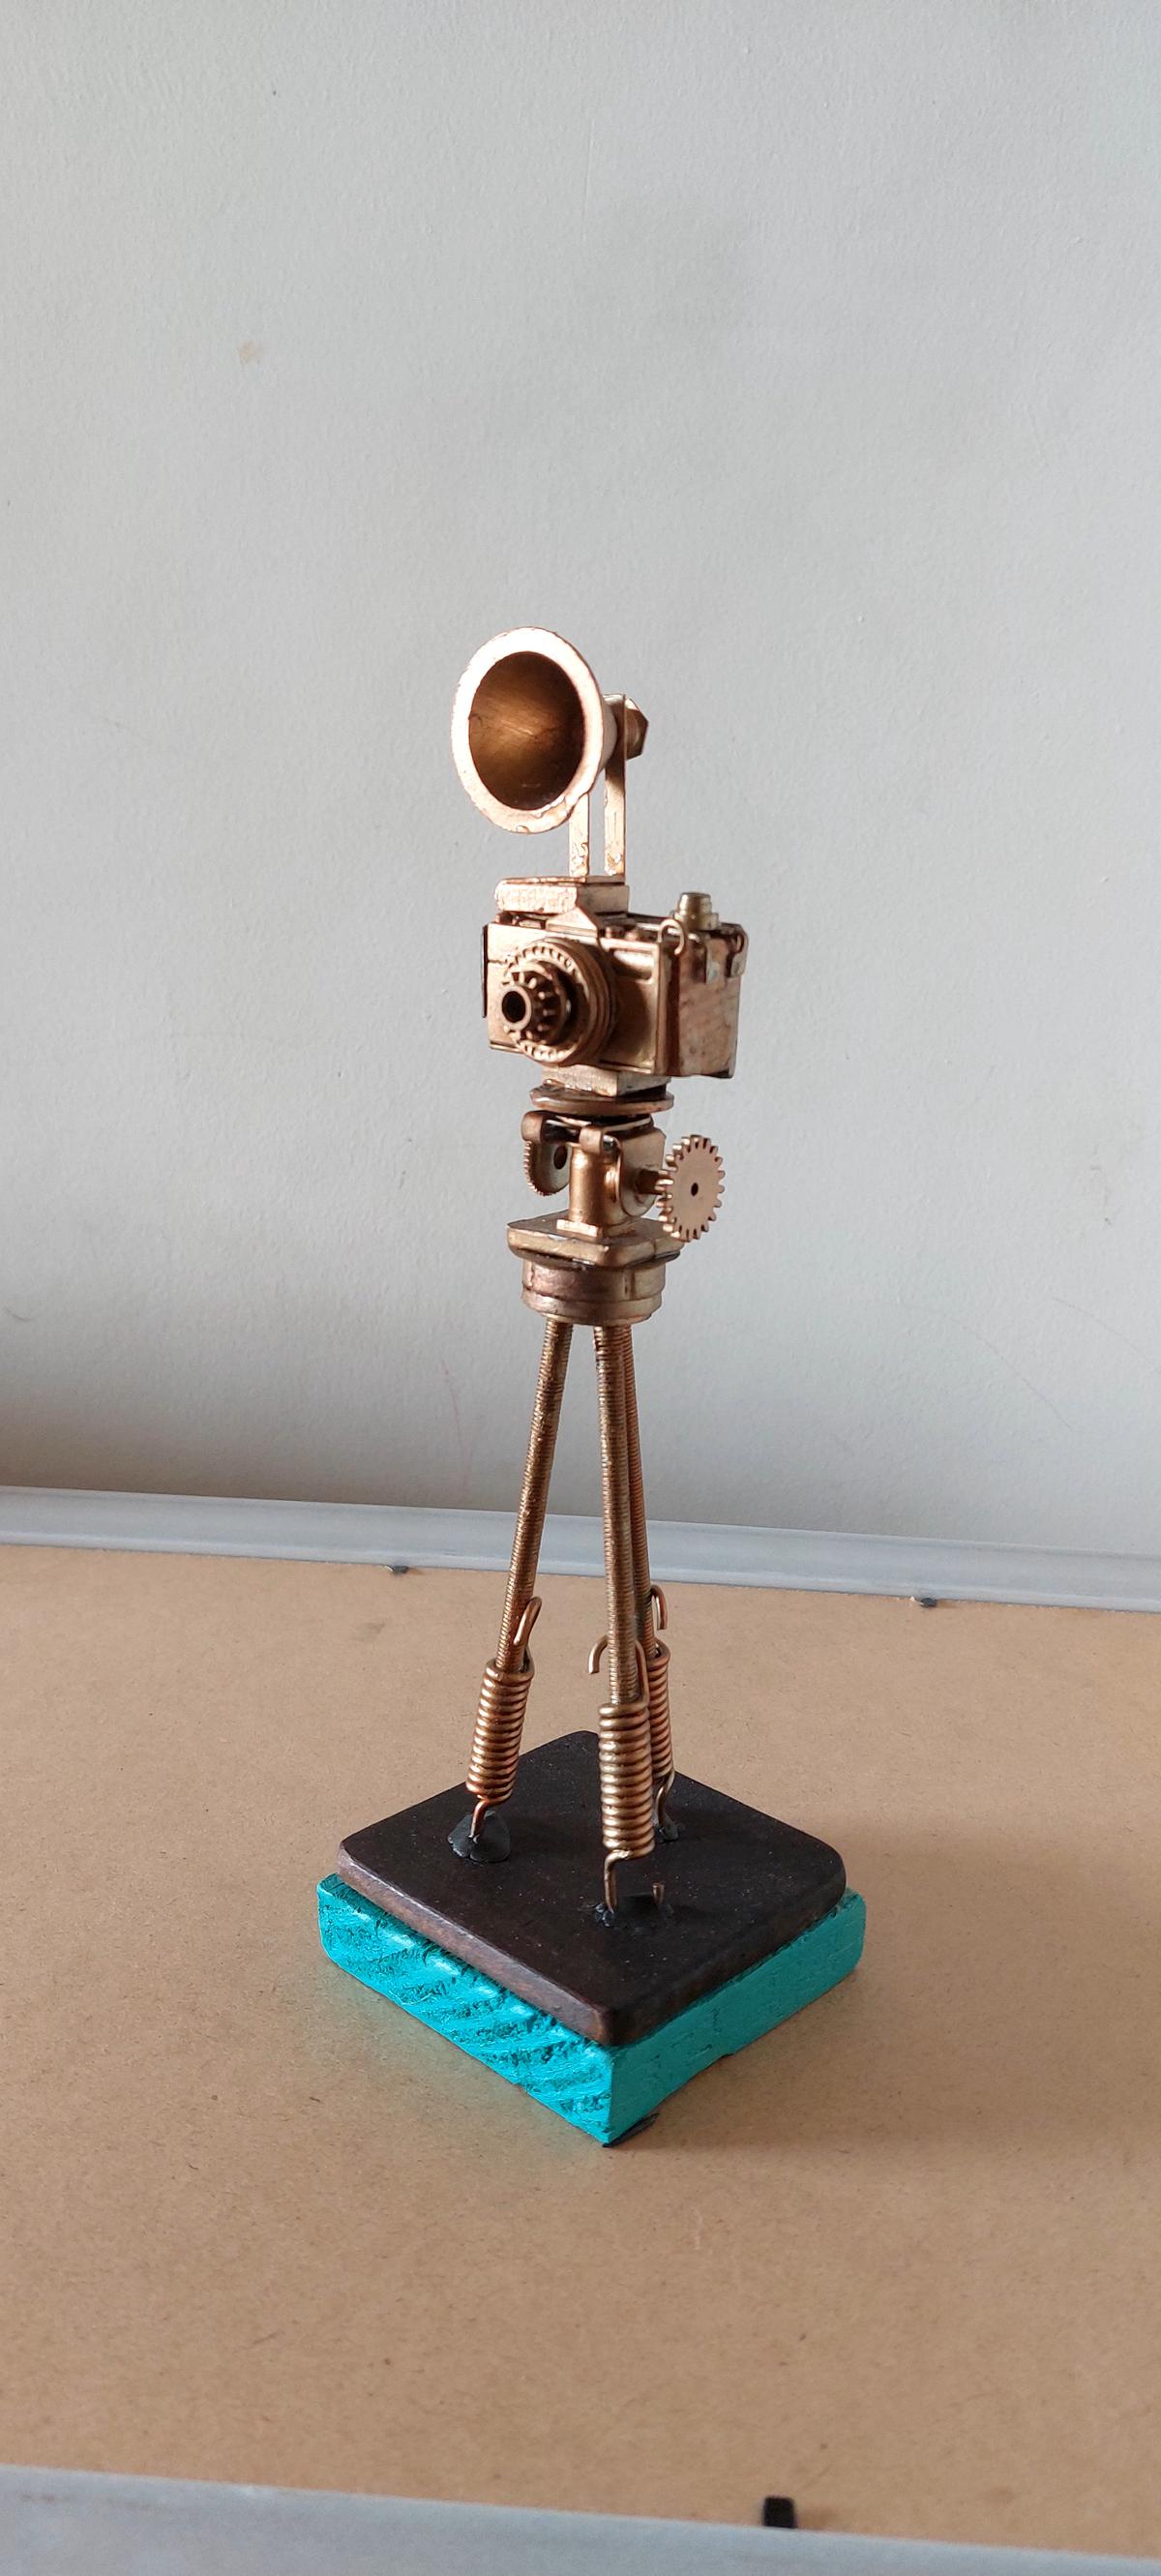 A trophy created from e-waste